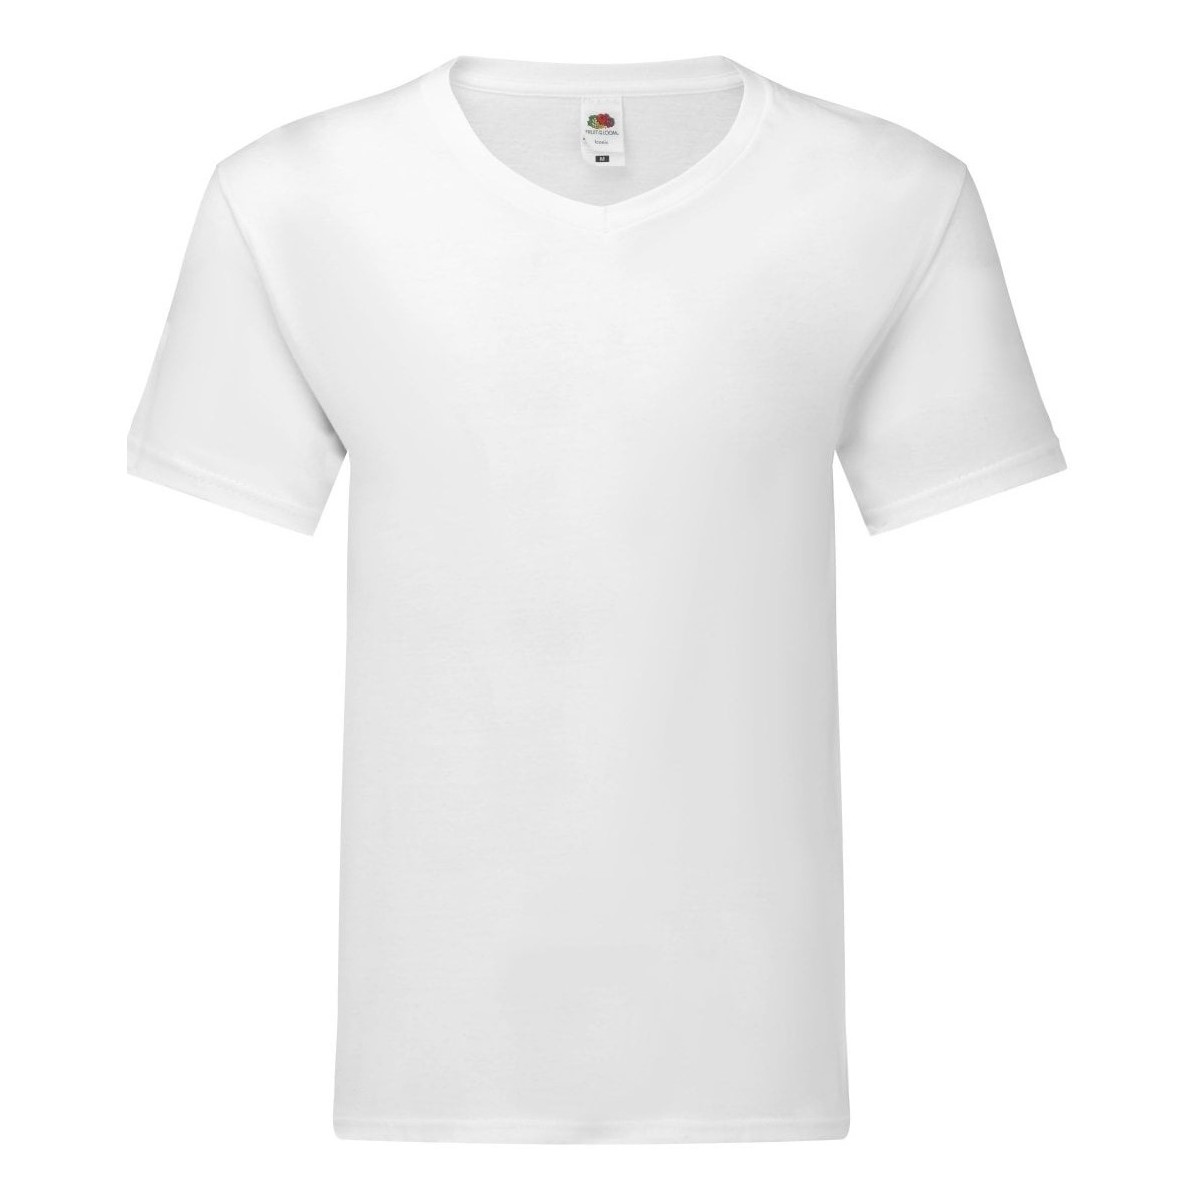 Vêtements Homme T-shirts manches longues Fruit Of The Loom 61442 Blanc